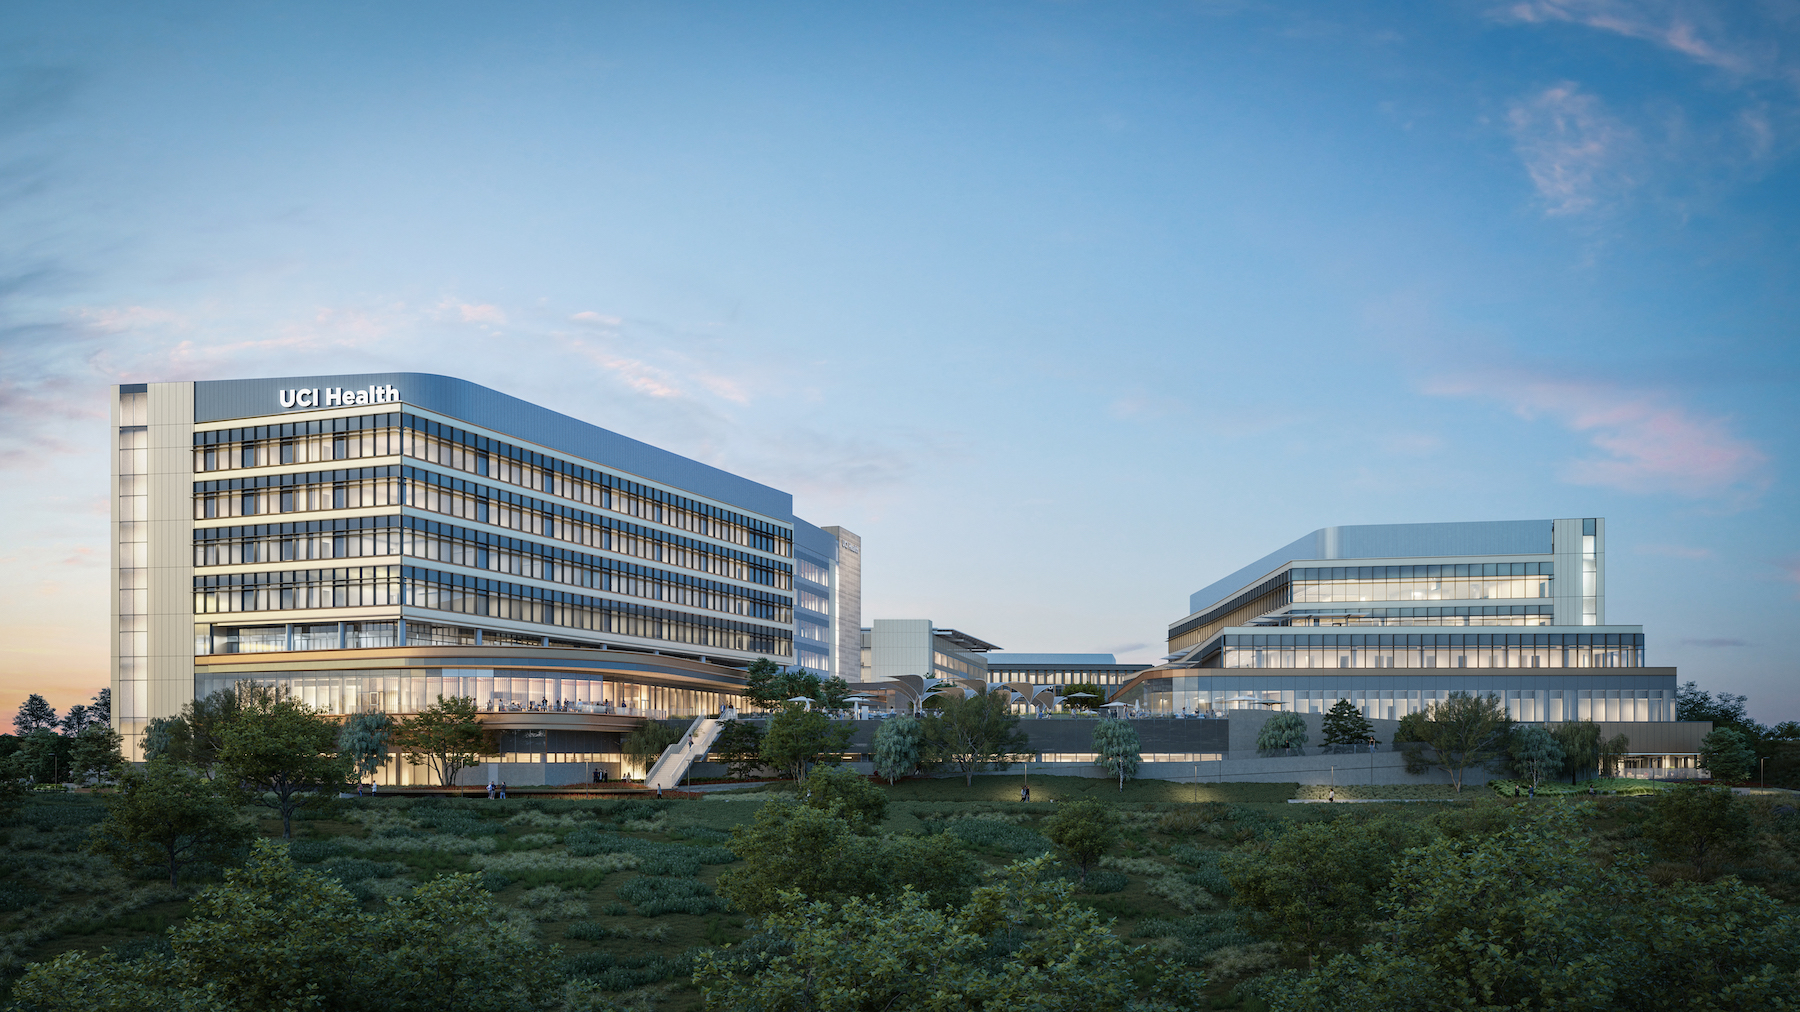 Rendering of the UCI Medical Center in Irvine, Calif., touted to be the nation's first all-electric healthcare facility. images: CO Architects